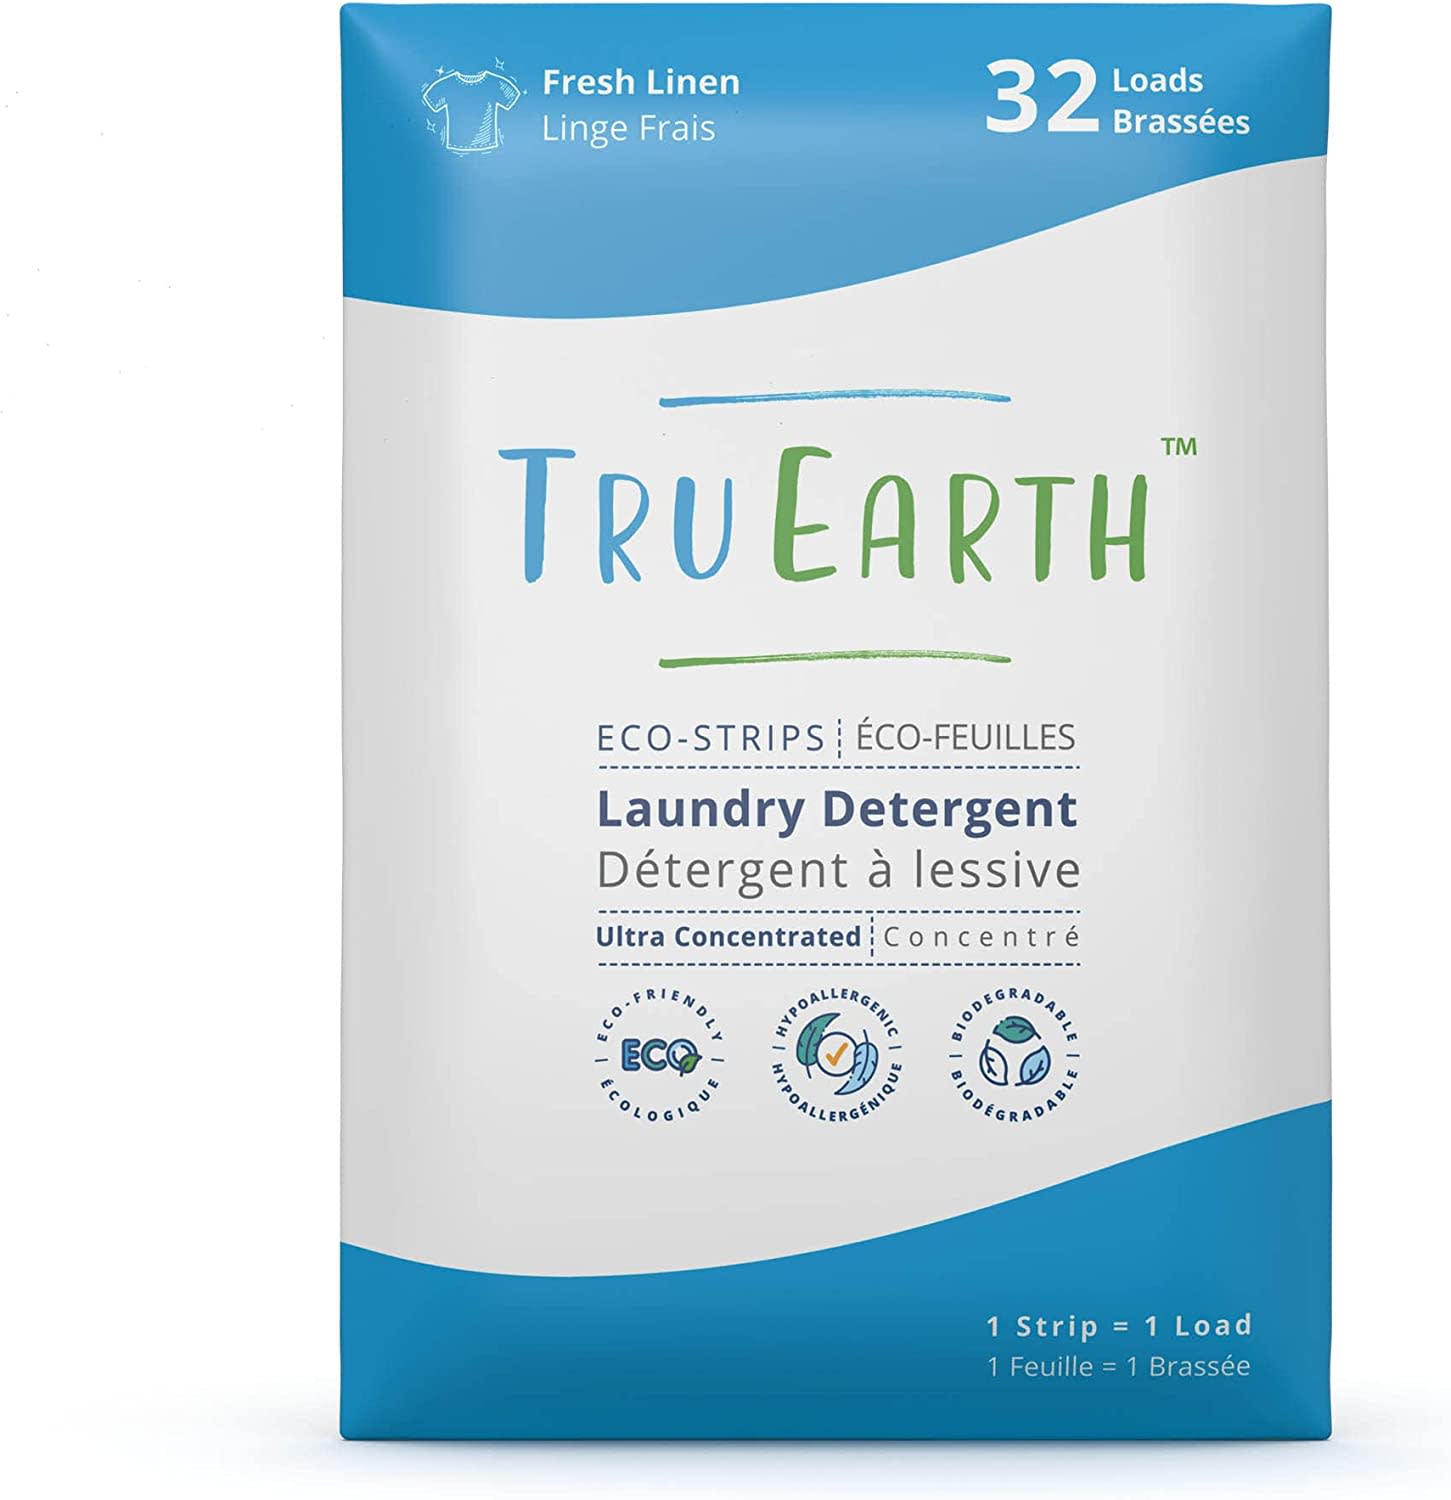 Grove Co. Laundry Detergent Sheets Review